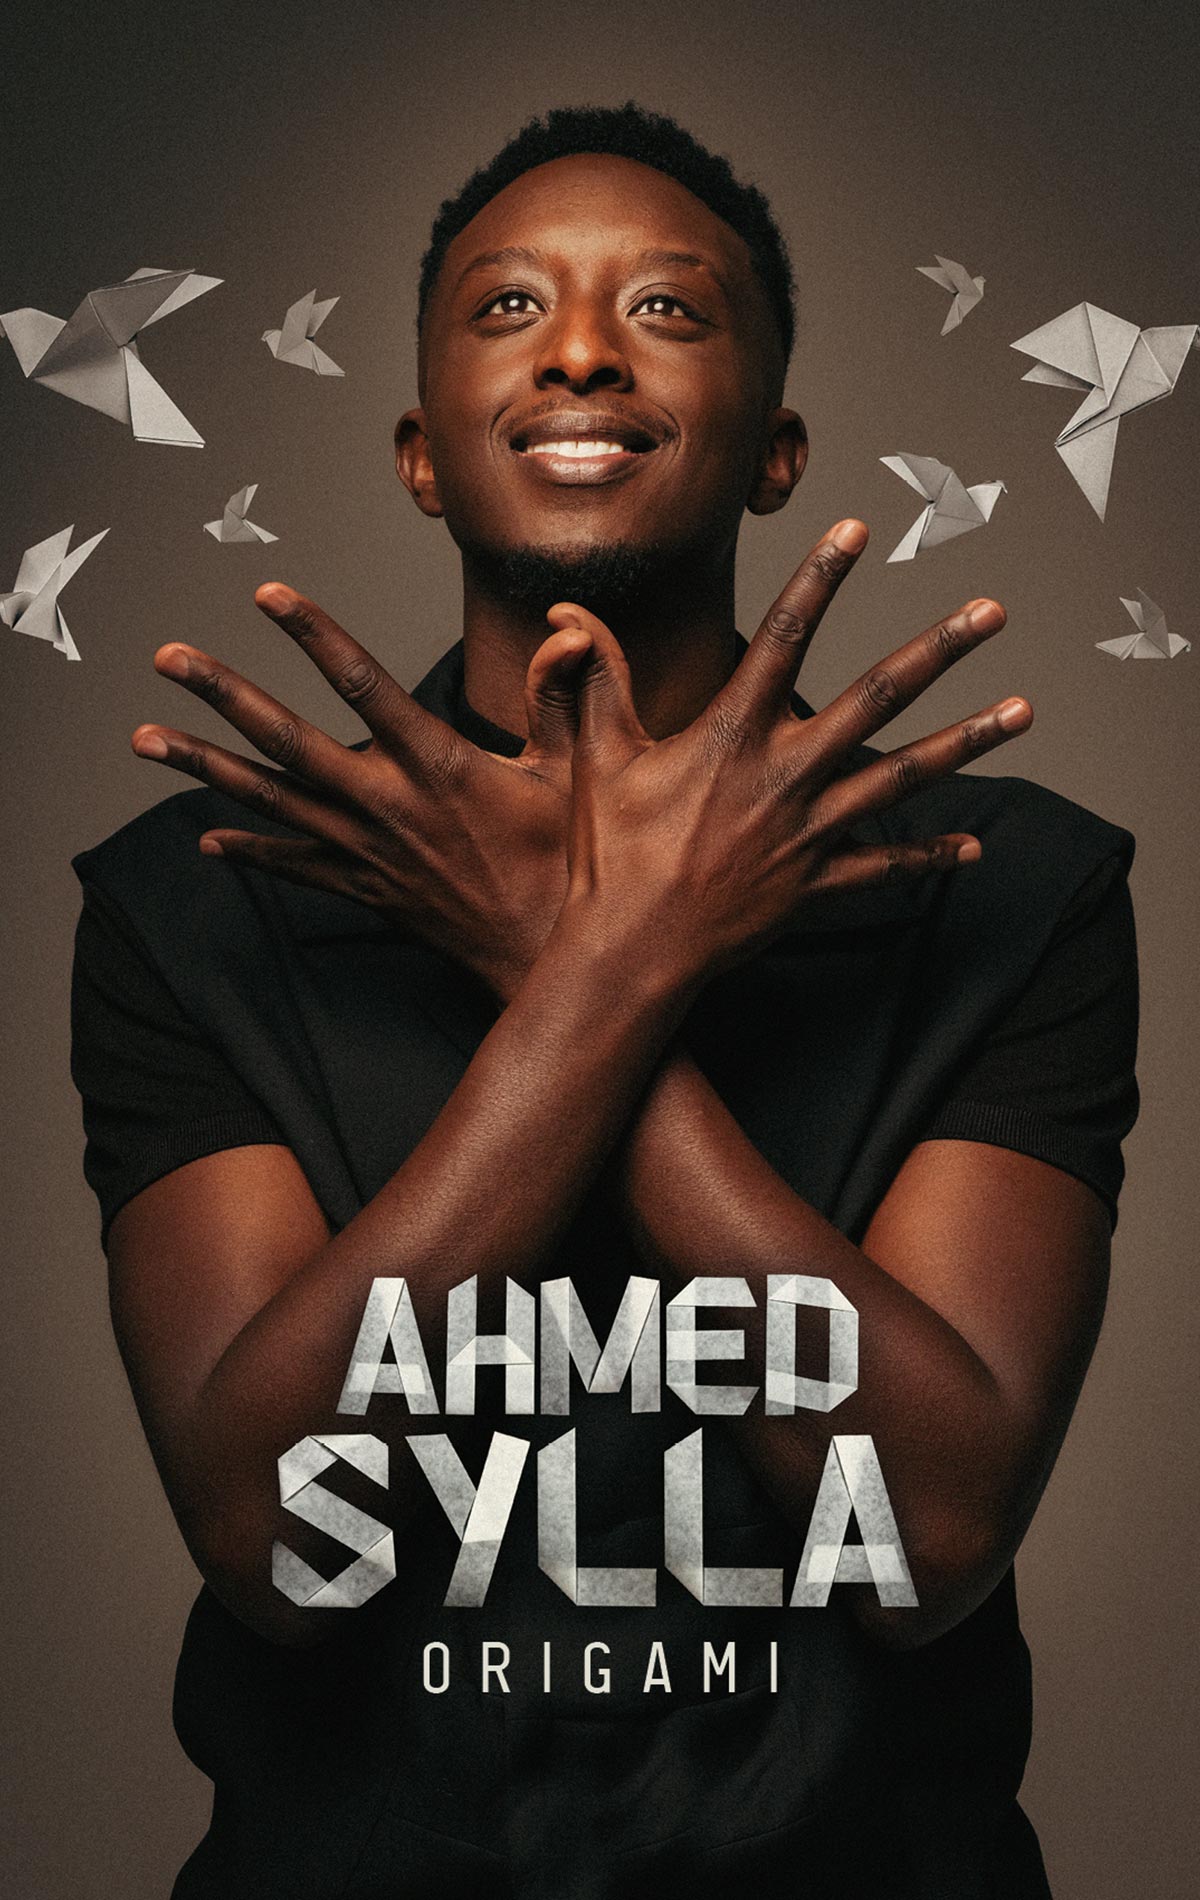 Ahmed Sylla in der Zenith Toulouse Tickets